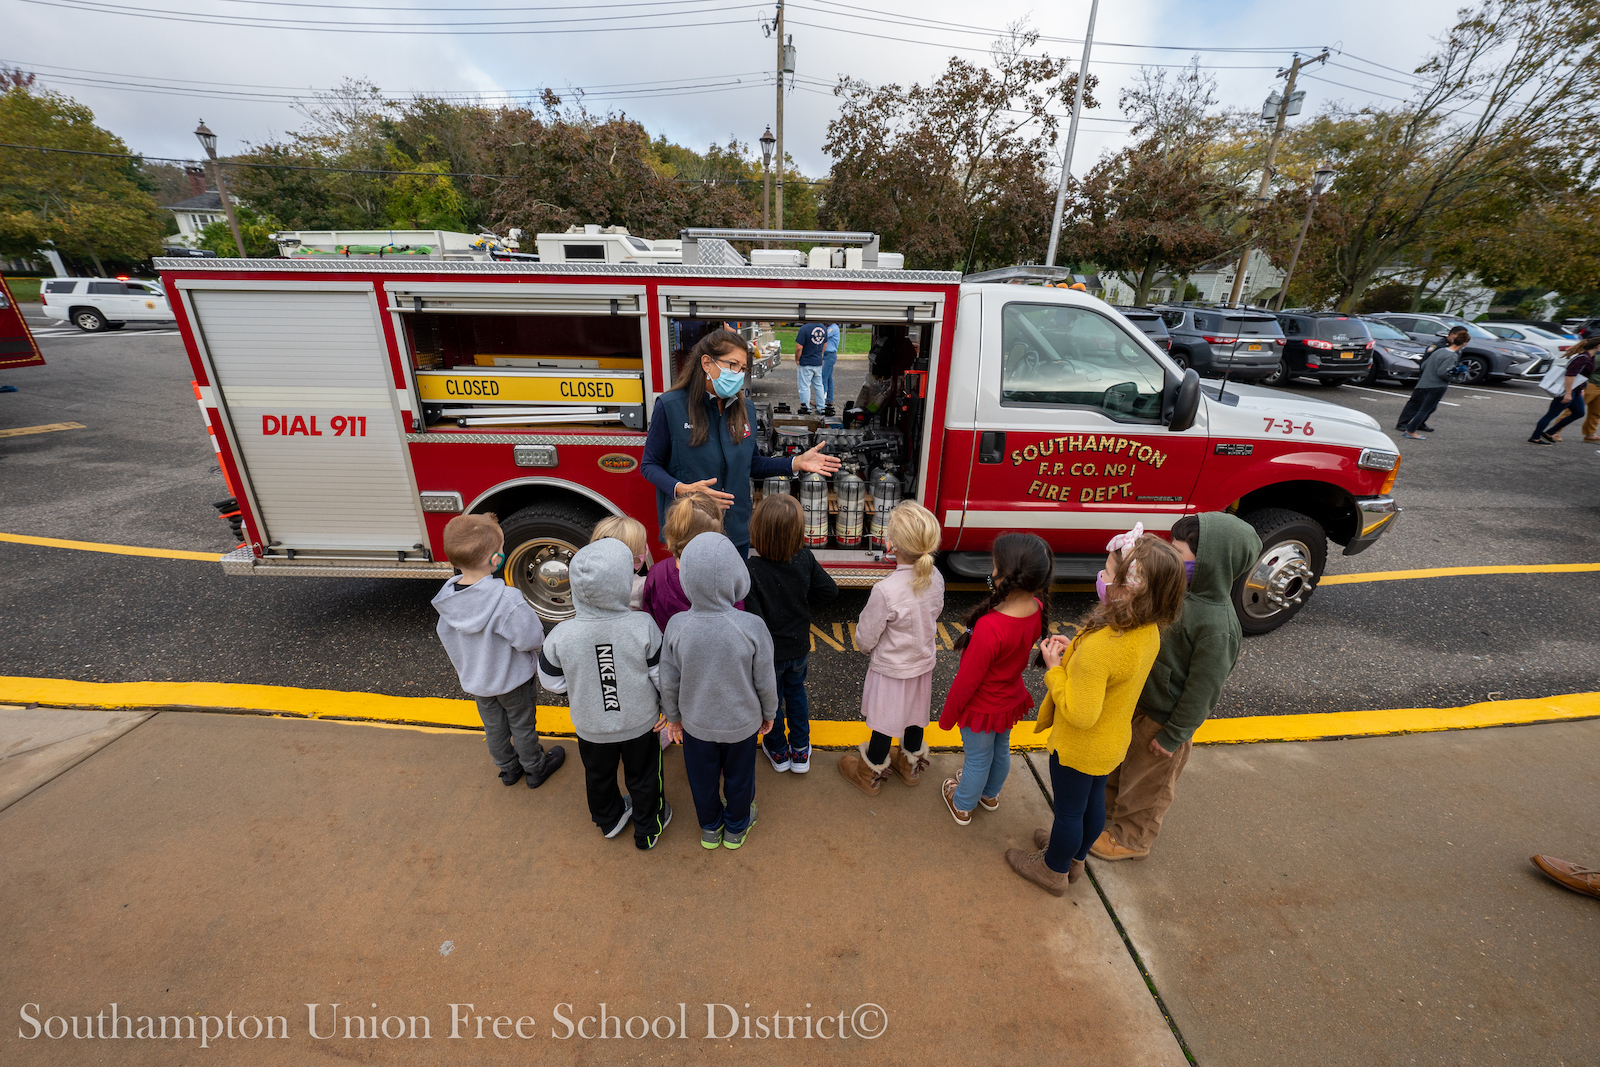 Southampton Elementary School students in grades pre-K to 3 learned about fire safety from the Southampton Fire Department on Oct. 22. During the visit, the students explored the fire department’s equipment and heard from firefighters about safety protocols and fire safety. 